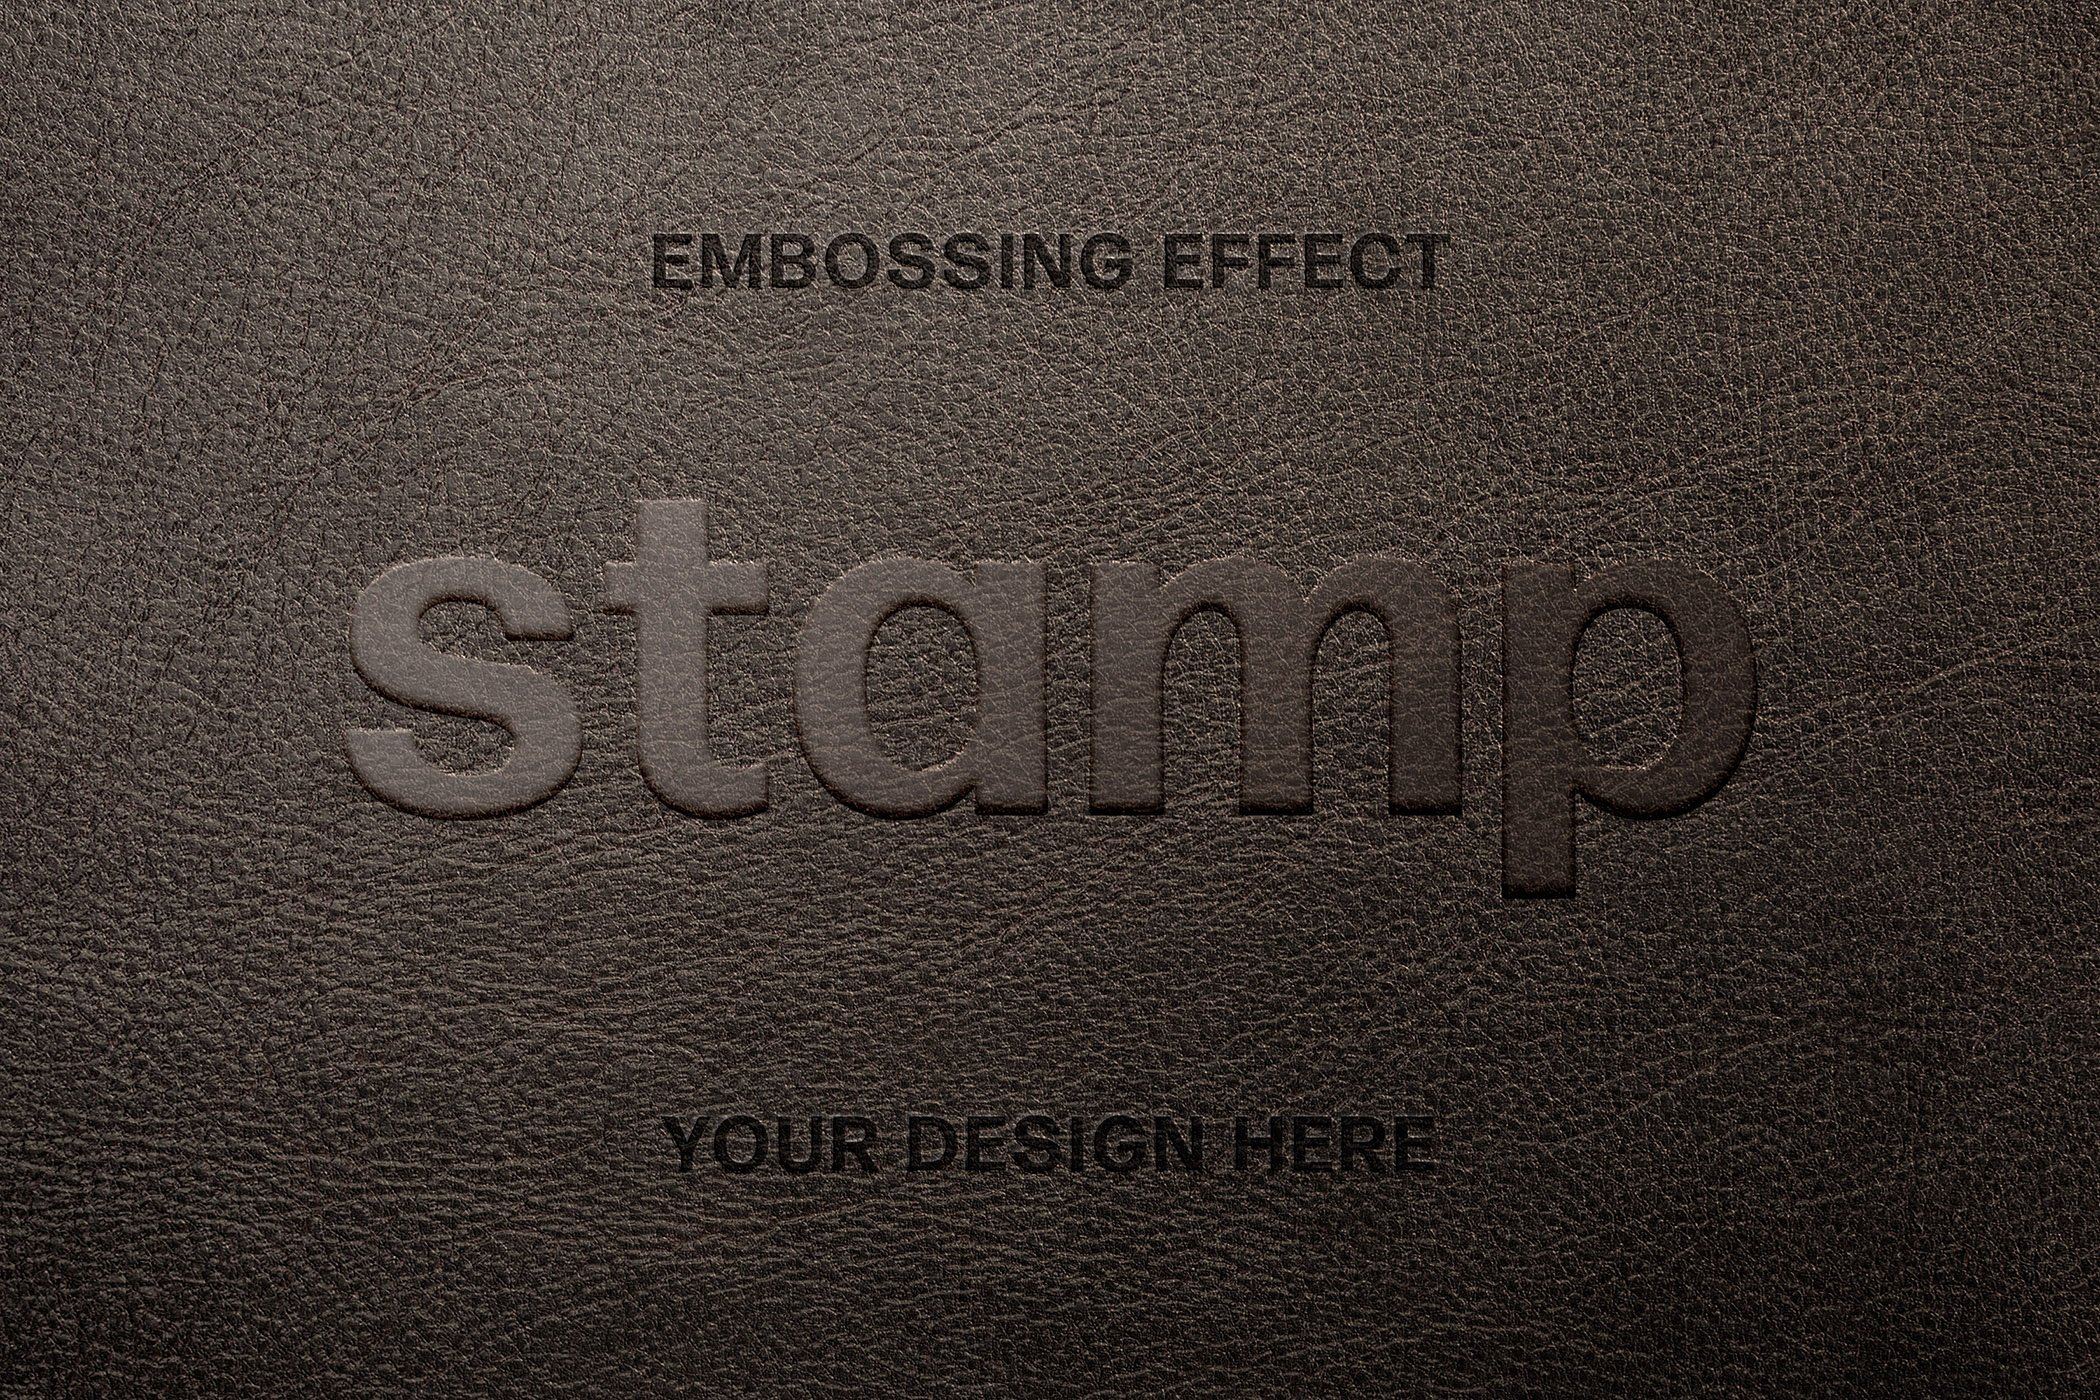 Leather Embossing Text Effectpreview image.